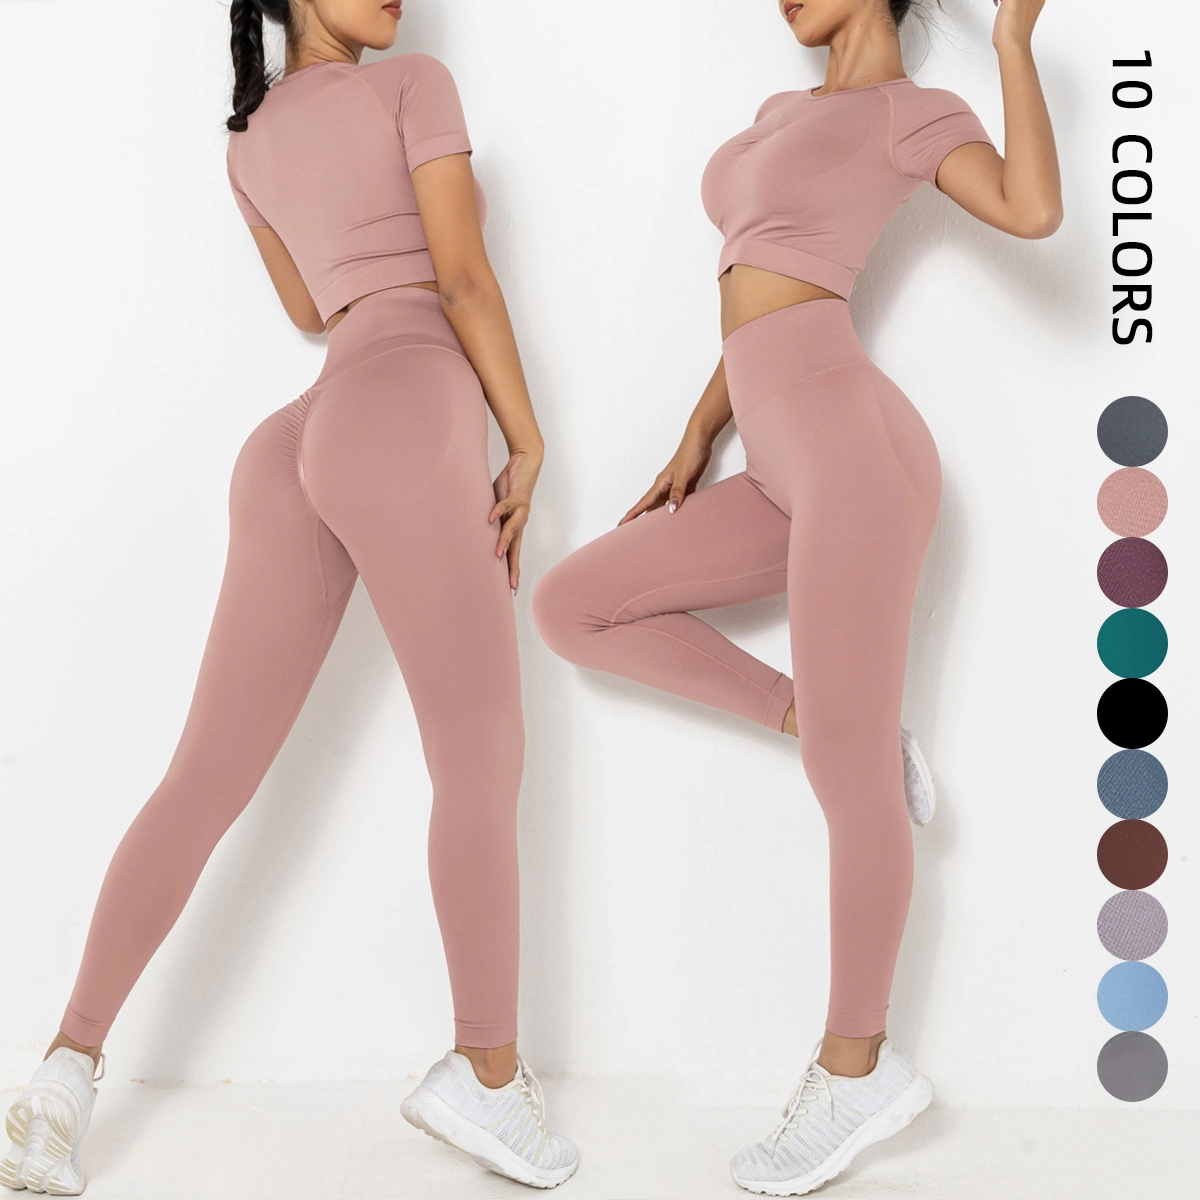 Seamless Yoga Set Workout Outfits for Women Sport Short Sleeves High Waist Shorts Yoga Leggings Sets Fitness Gym Clothing